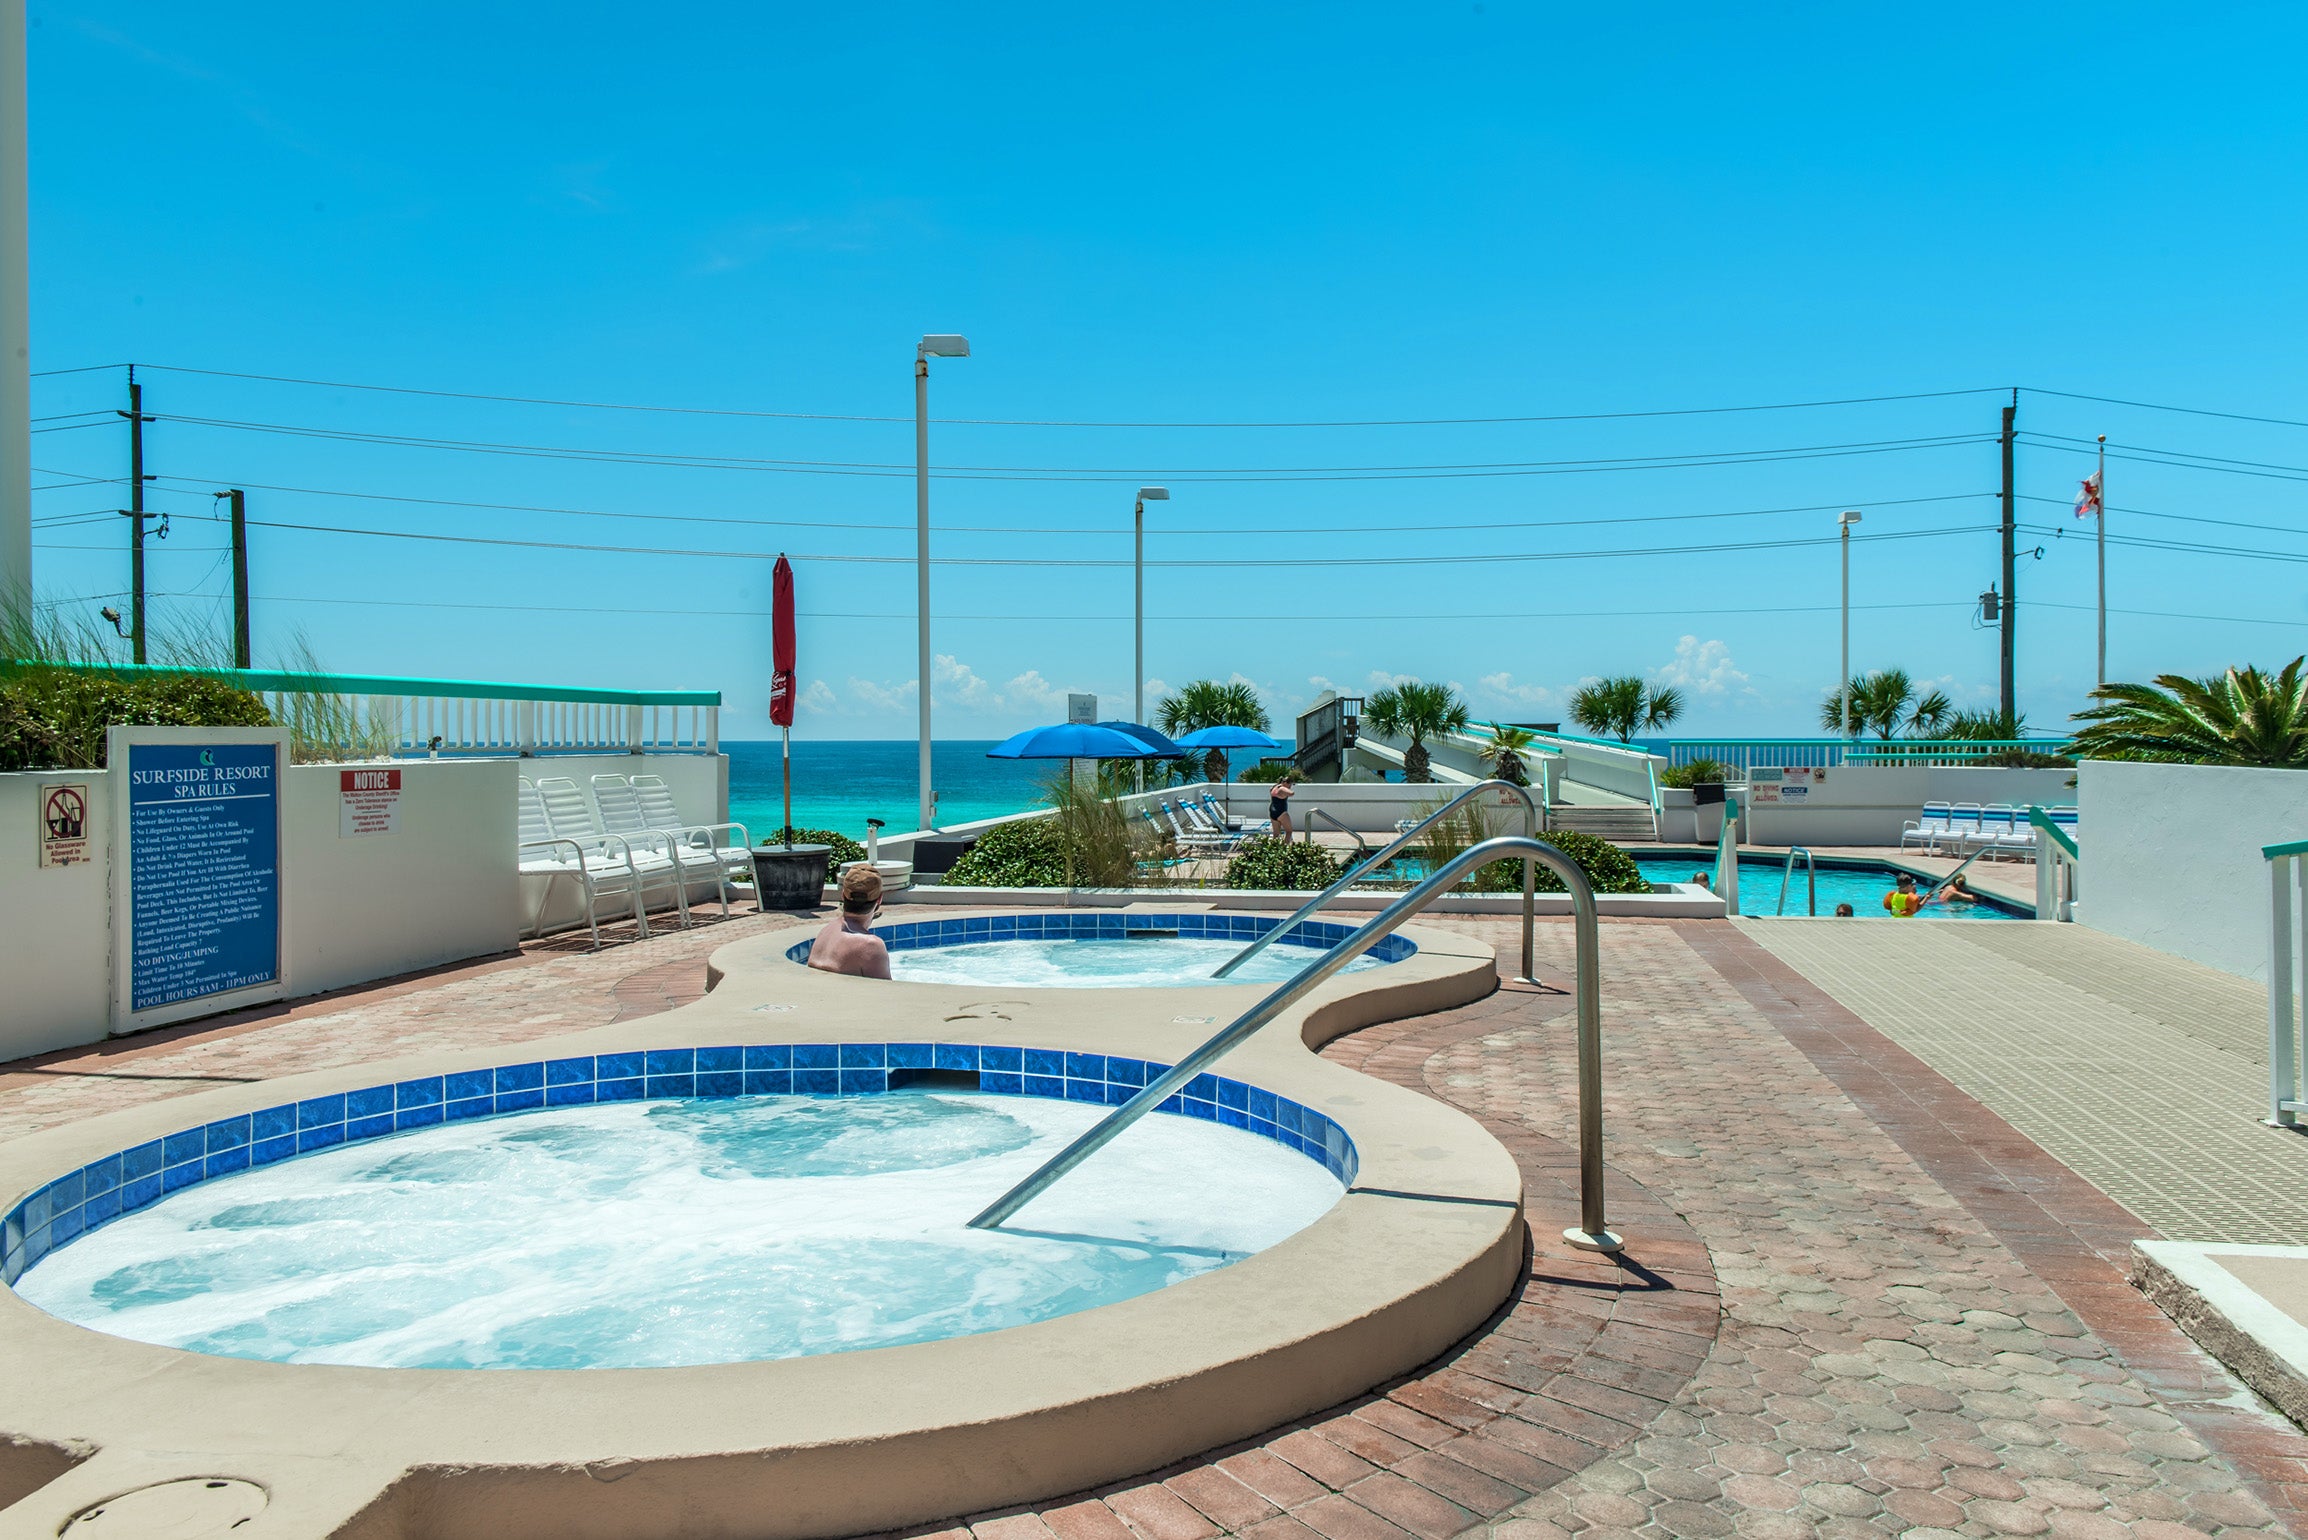 Dual hot tubs and pool at Surfside